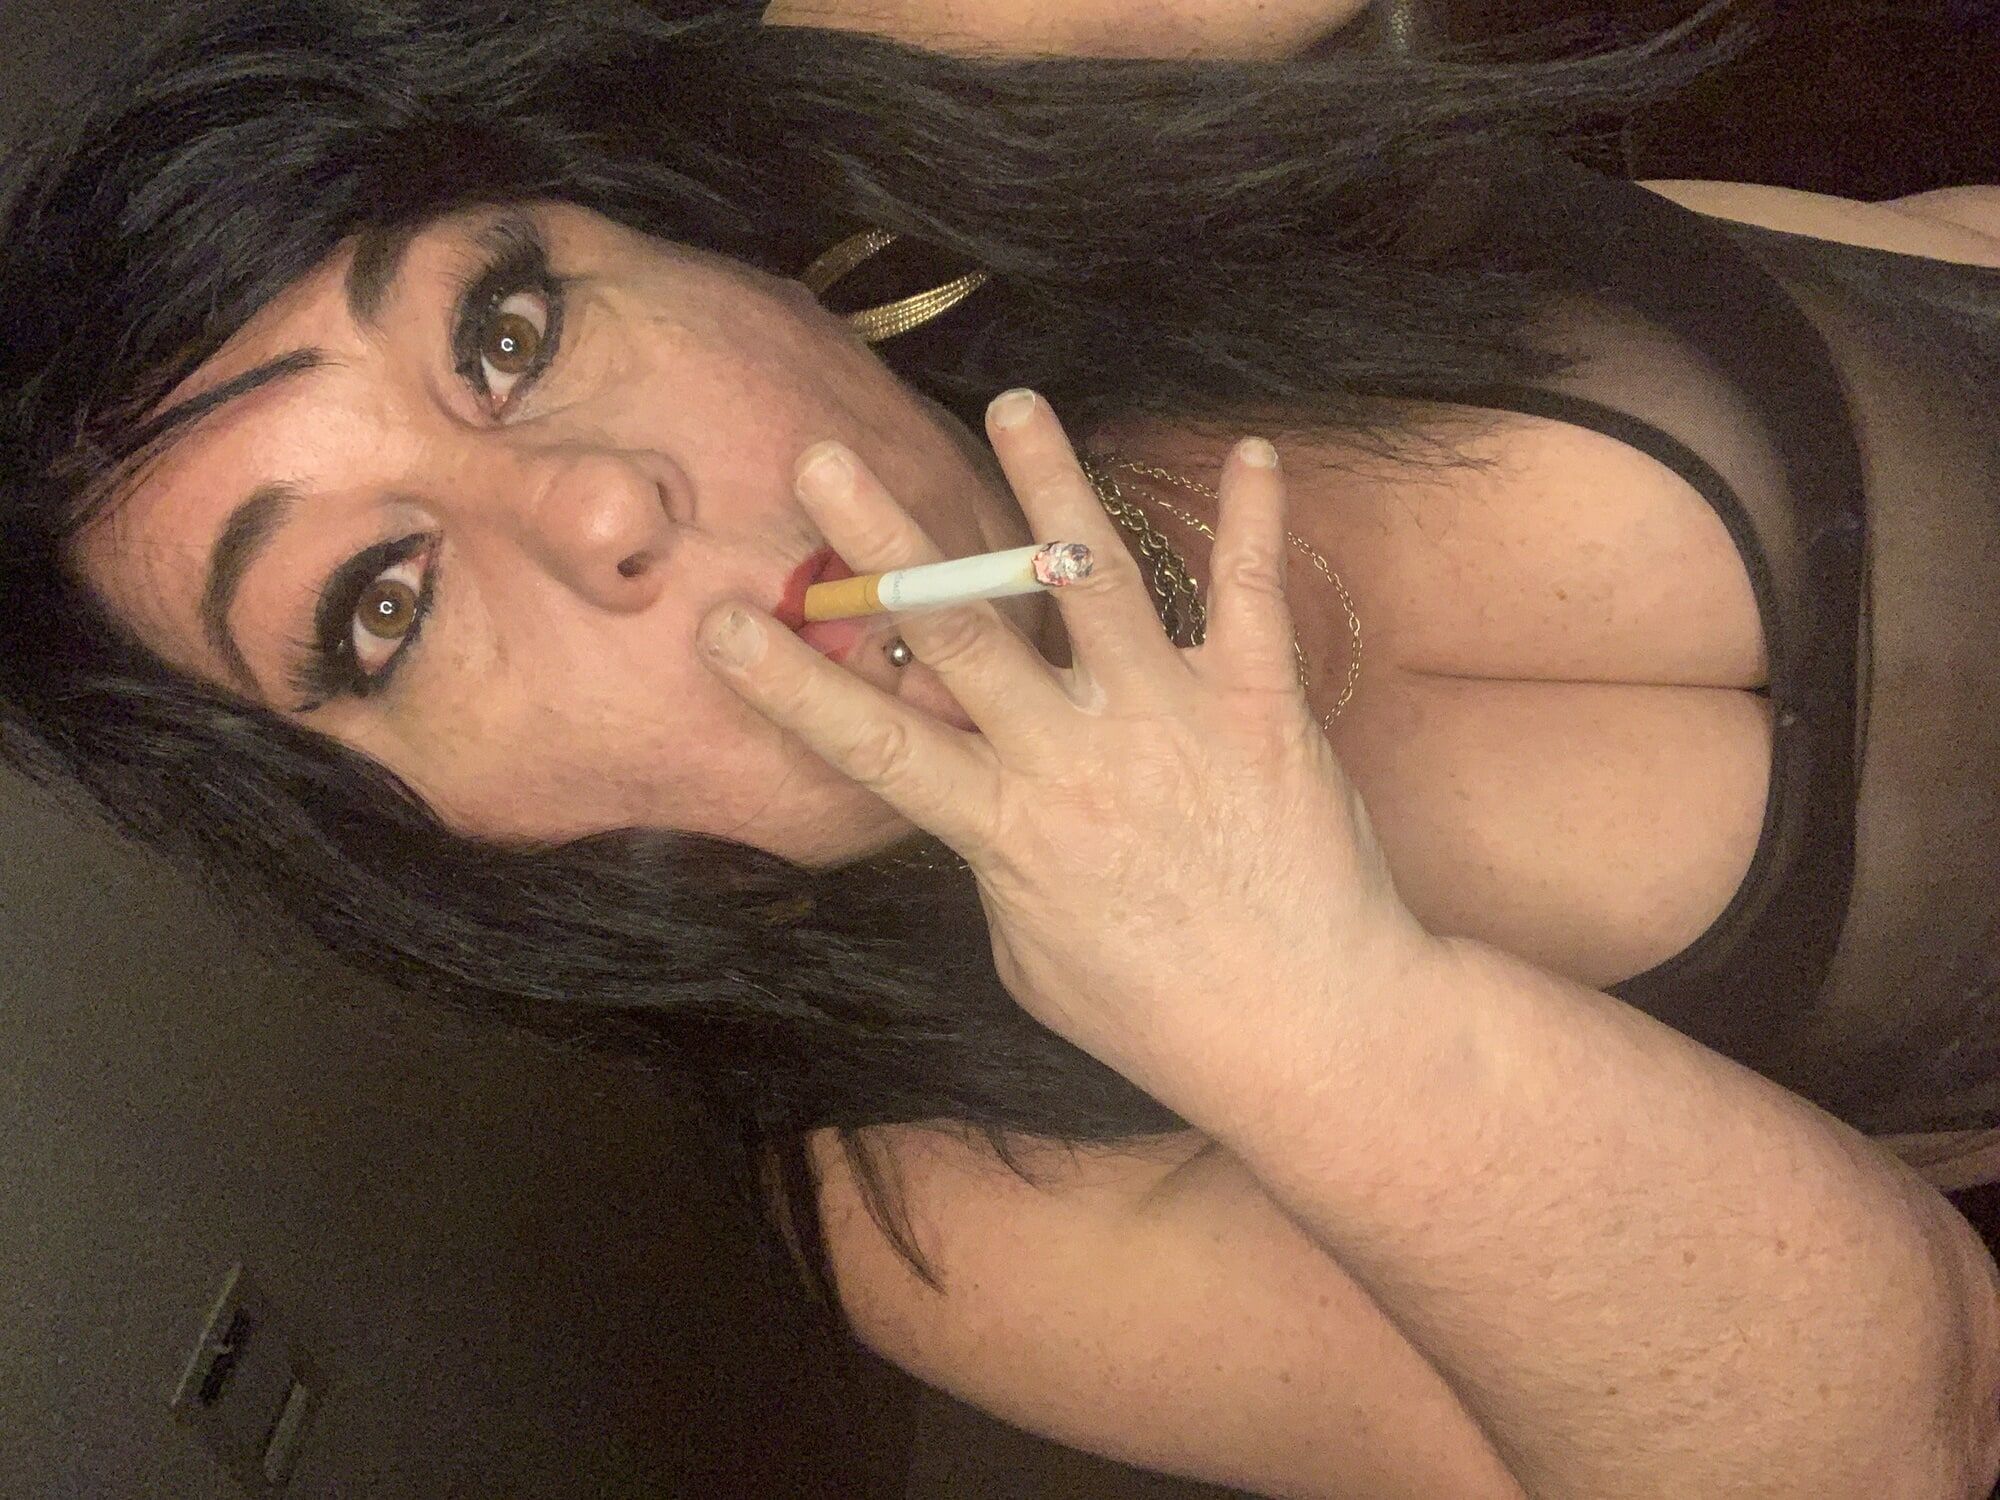 Mommy looks hot smoking